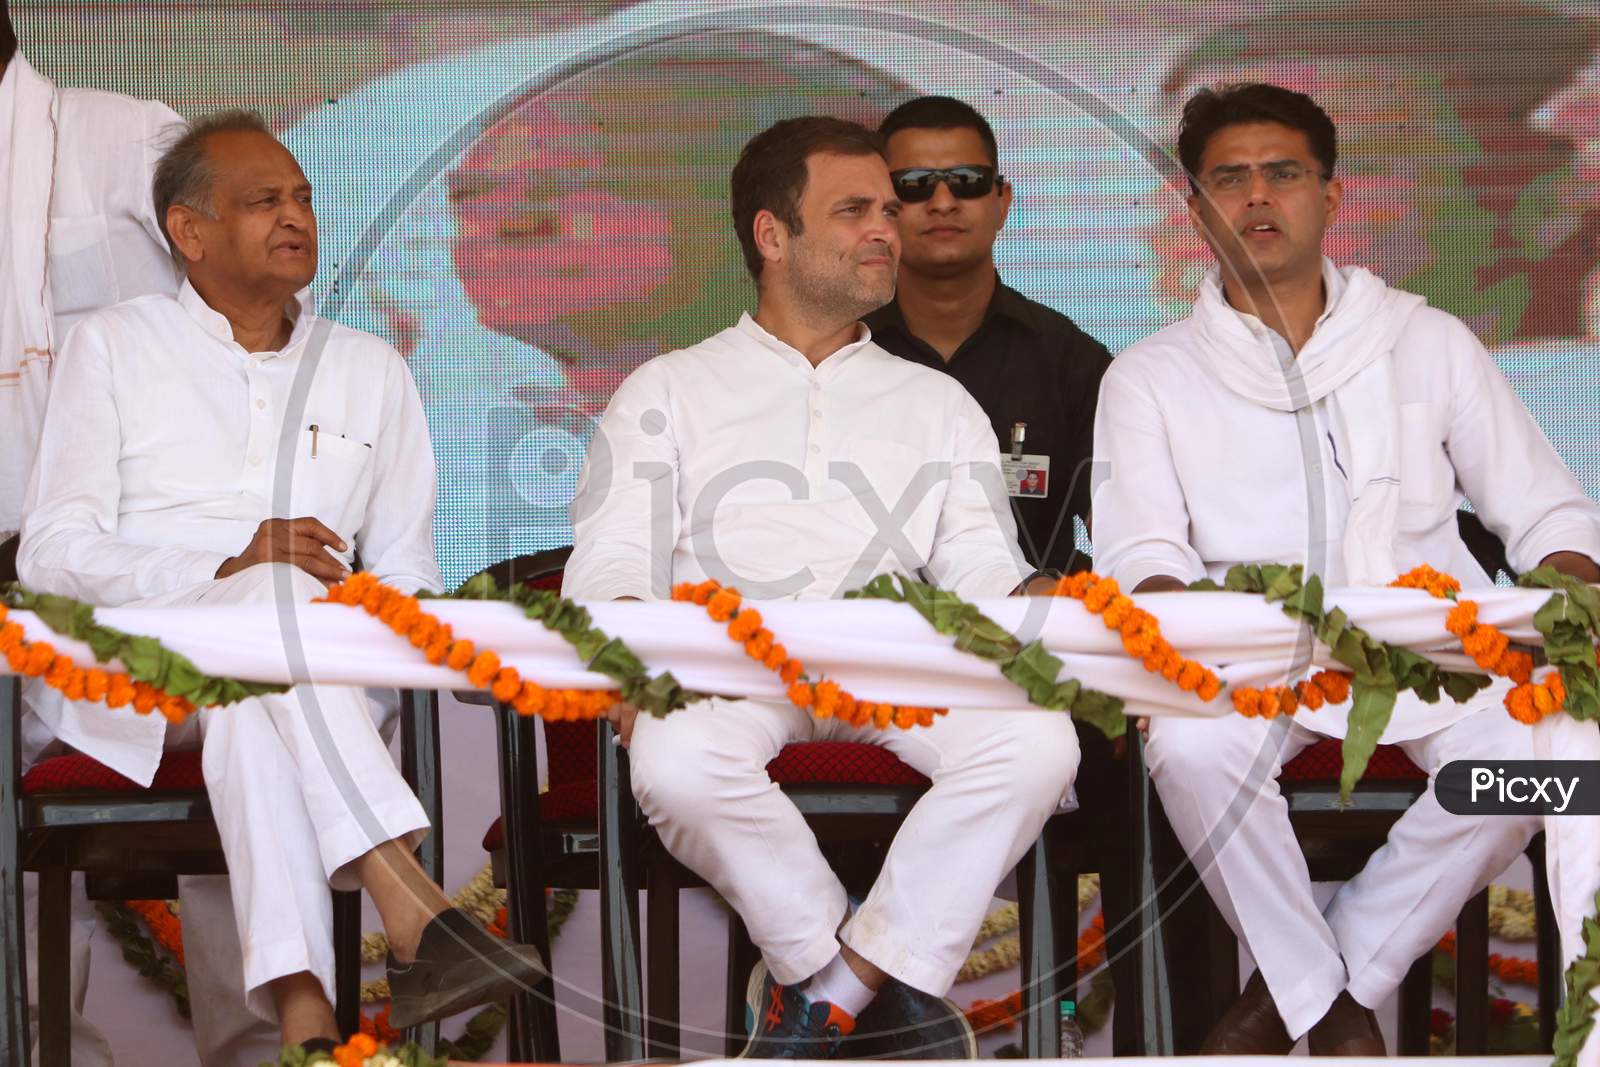 Rahul Gandhi, President of Indian National Congress(INC) with Ashok Gehlot, Rajasthan Chief Minister and Sachin Pilot, Deputy Chief Minister of Rajasthan during an election campaign rally in Ajmer, Rajasthan on April 25, 2019